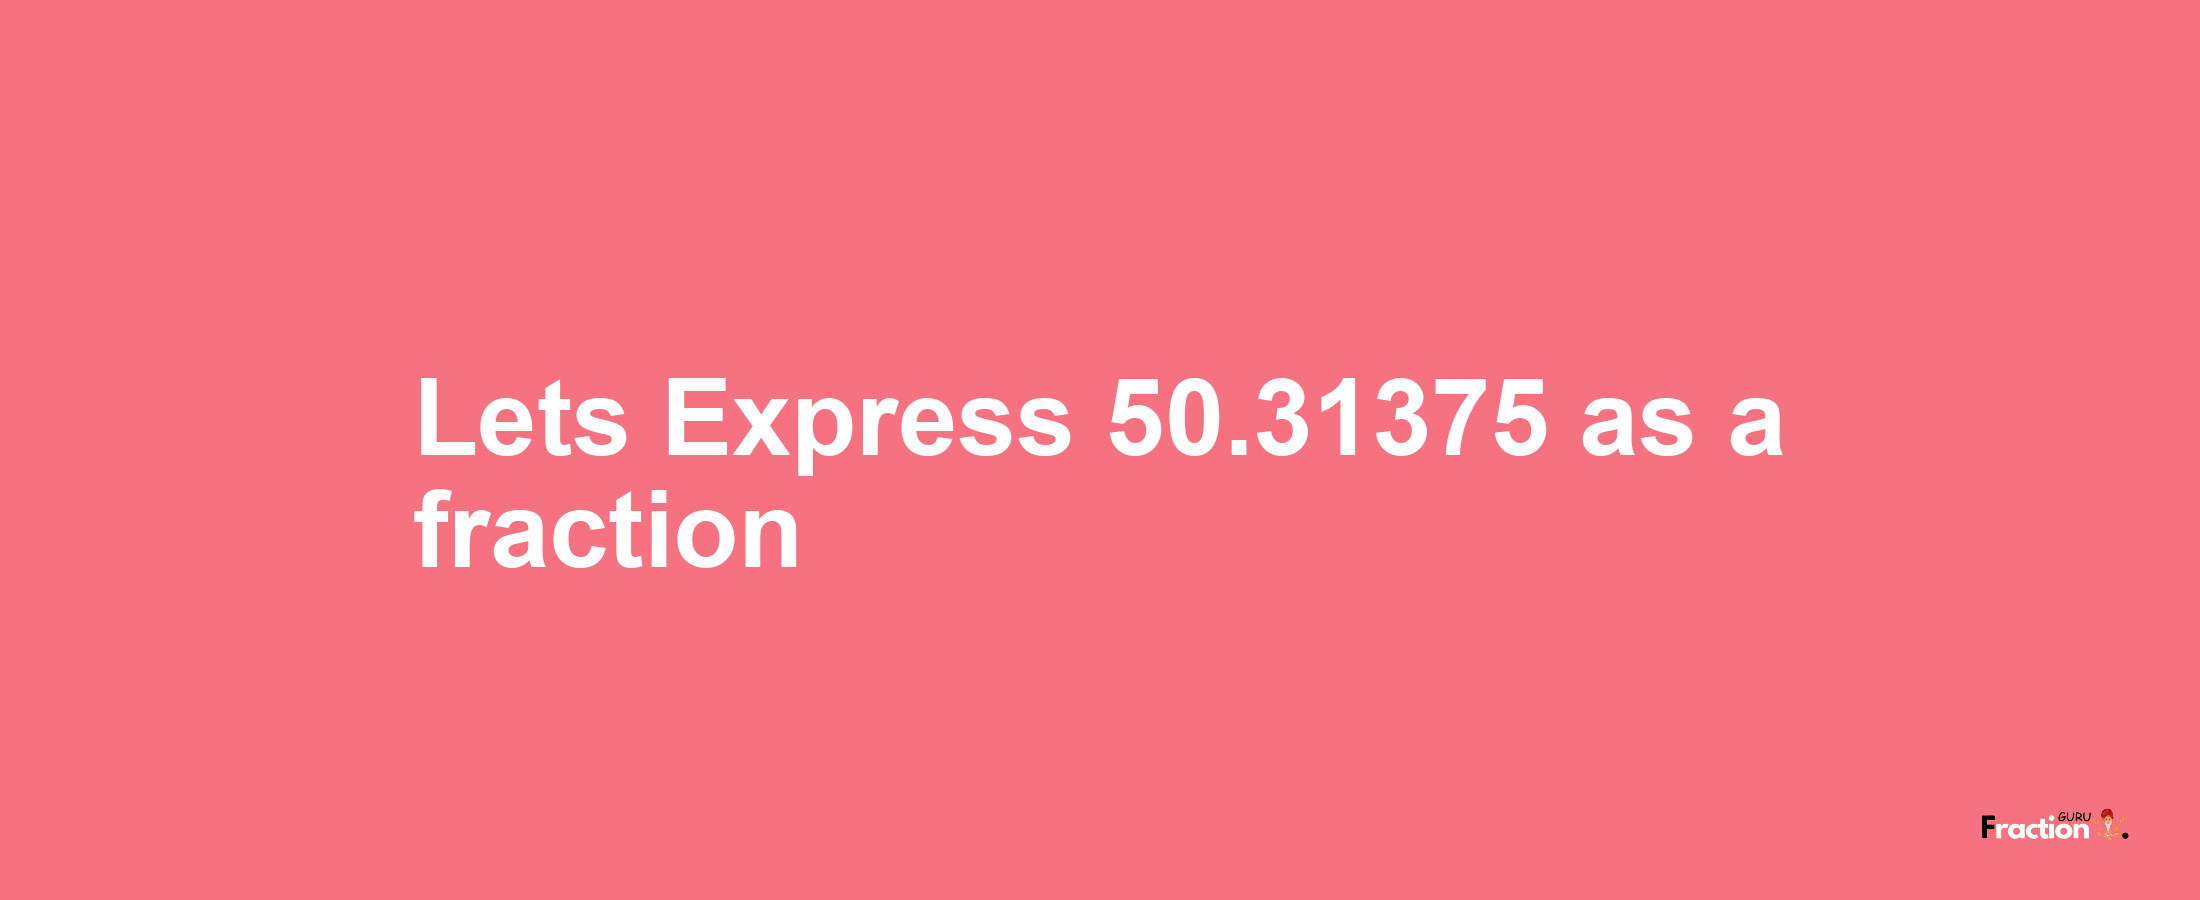 Lets Express 50.31375 as afraction